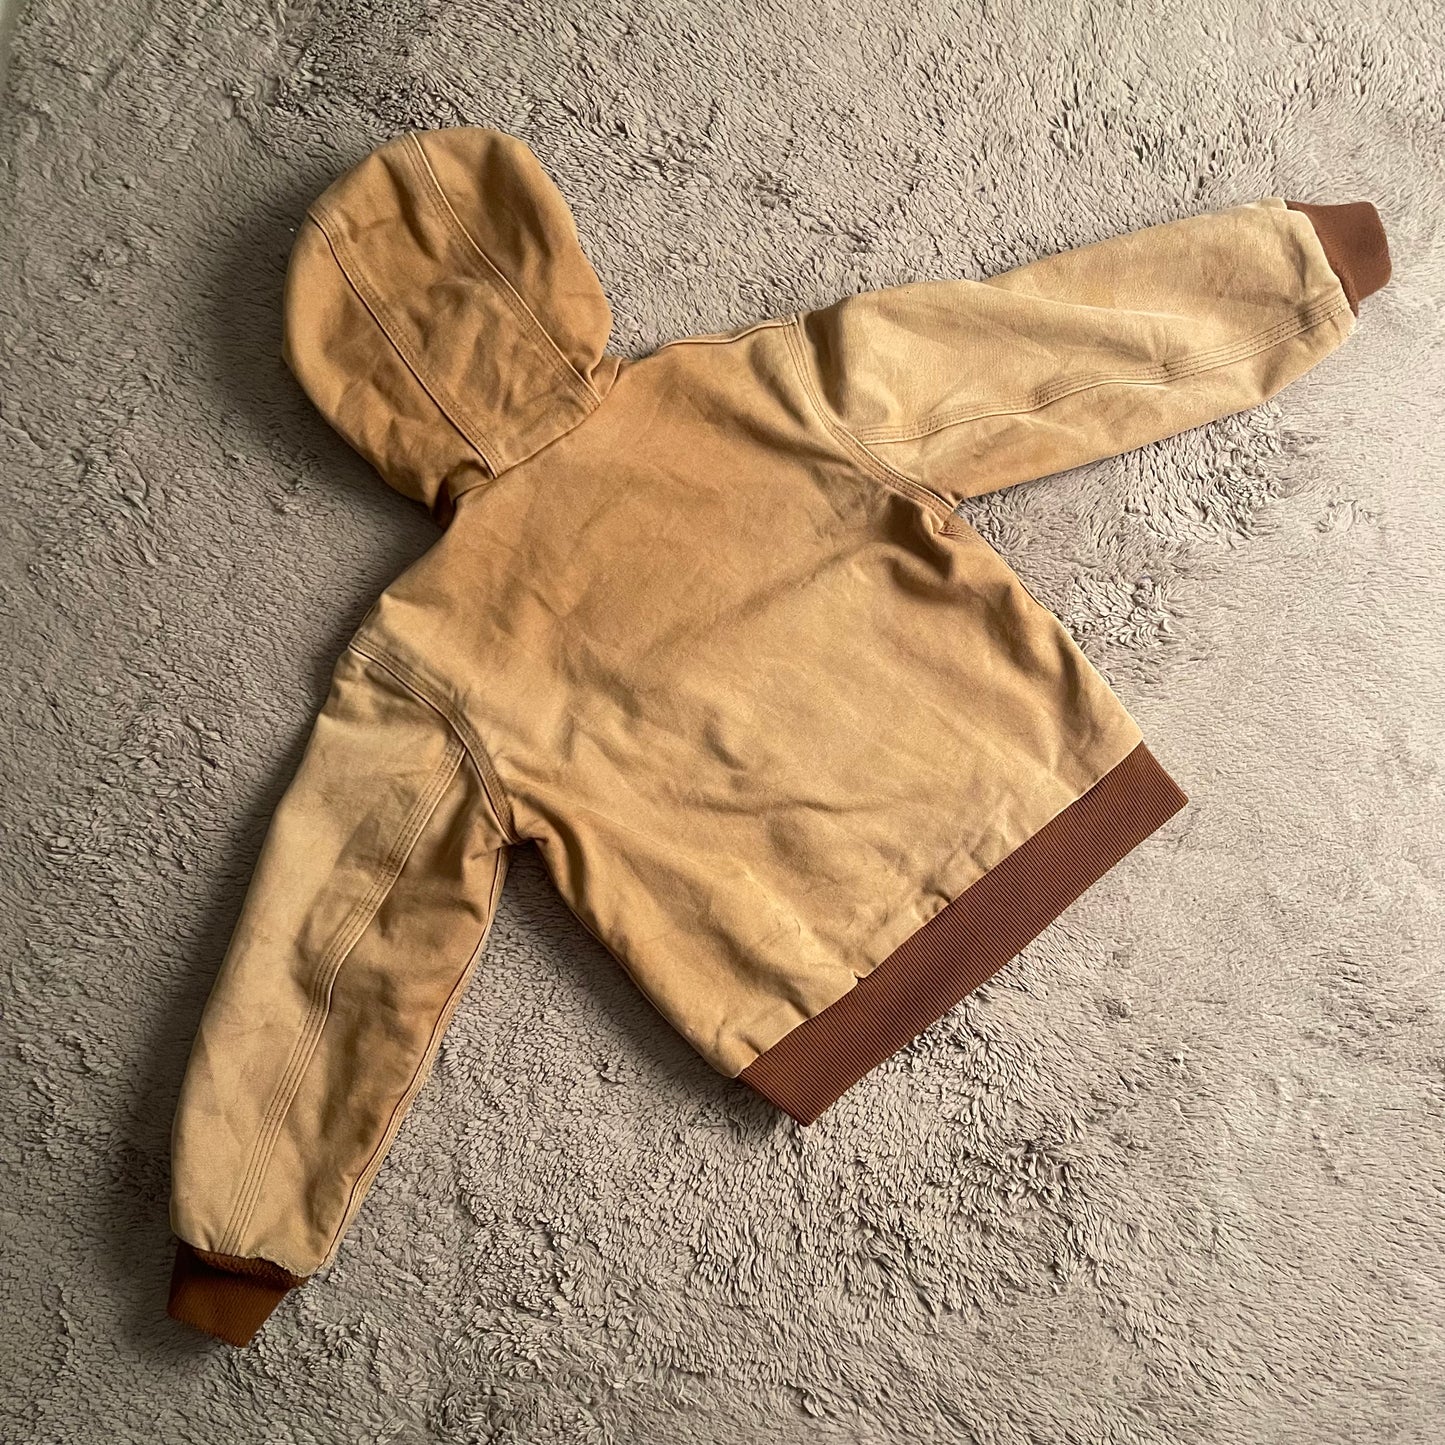 Carhartt Youth Distressed Jacket (Kids Size M/8)